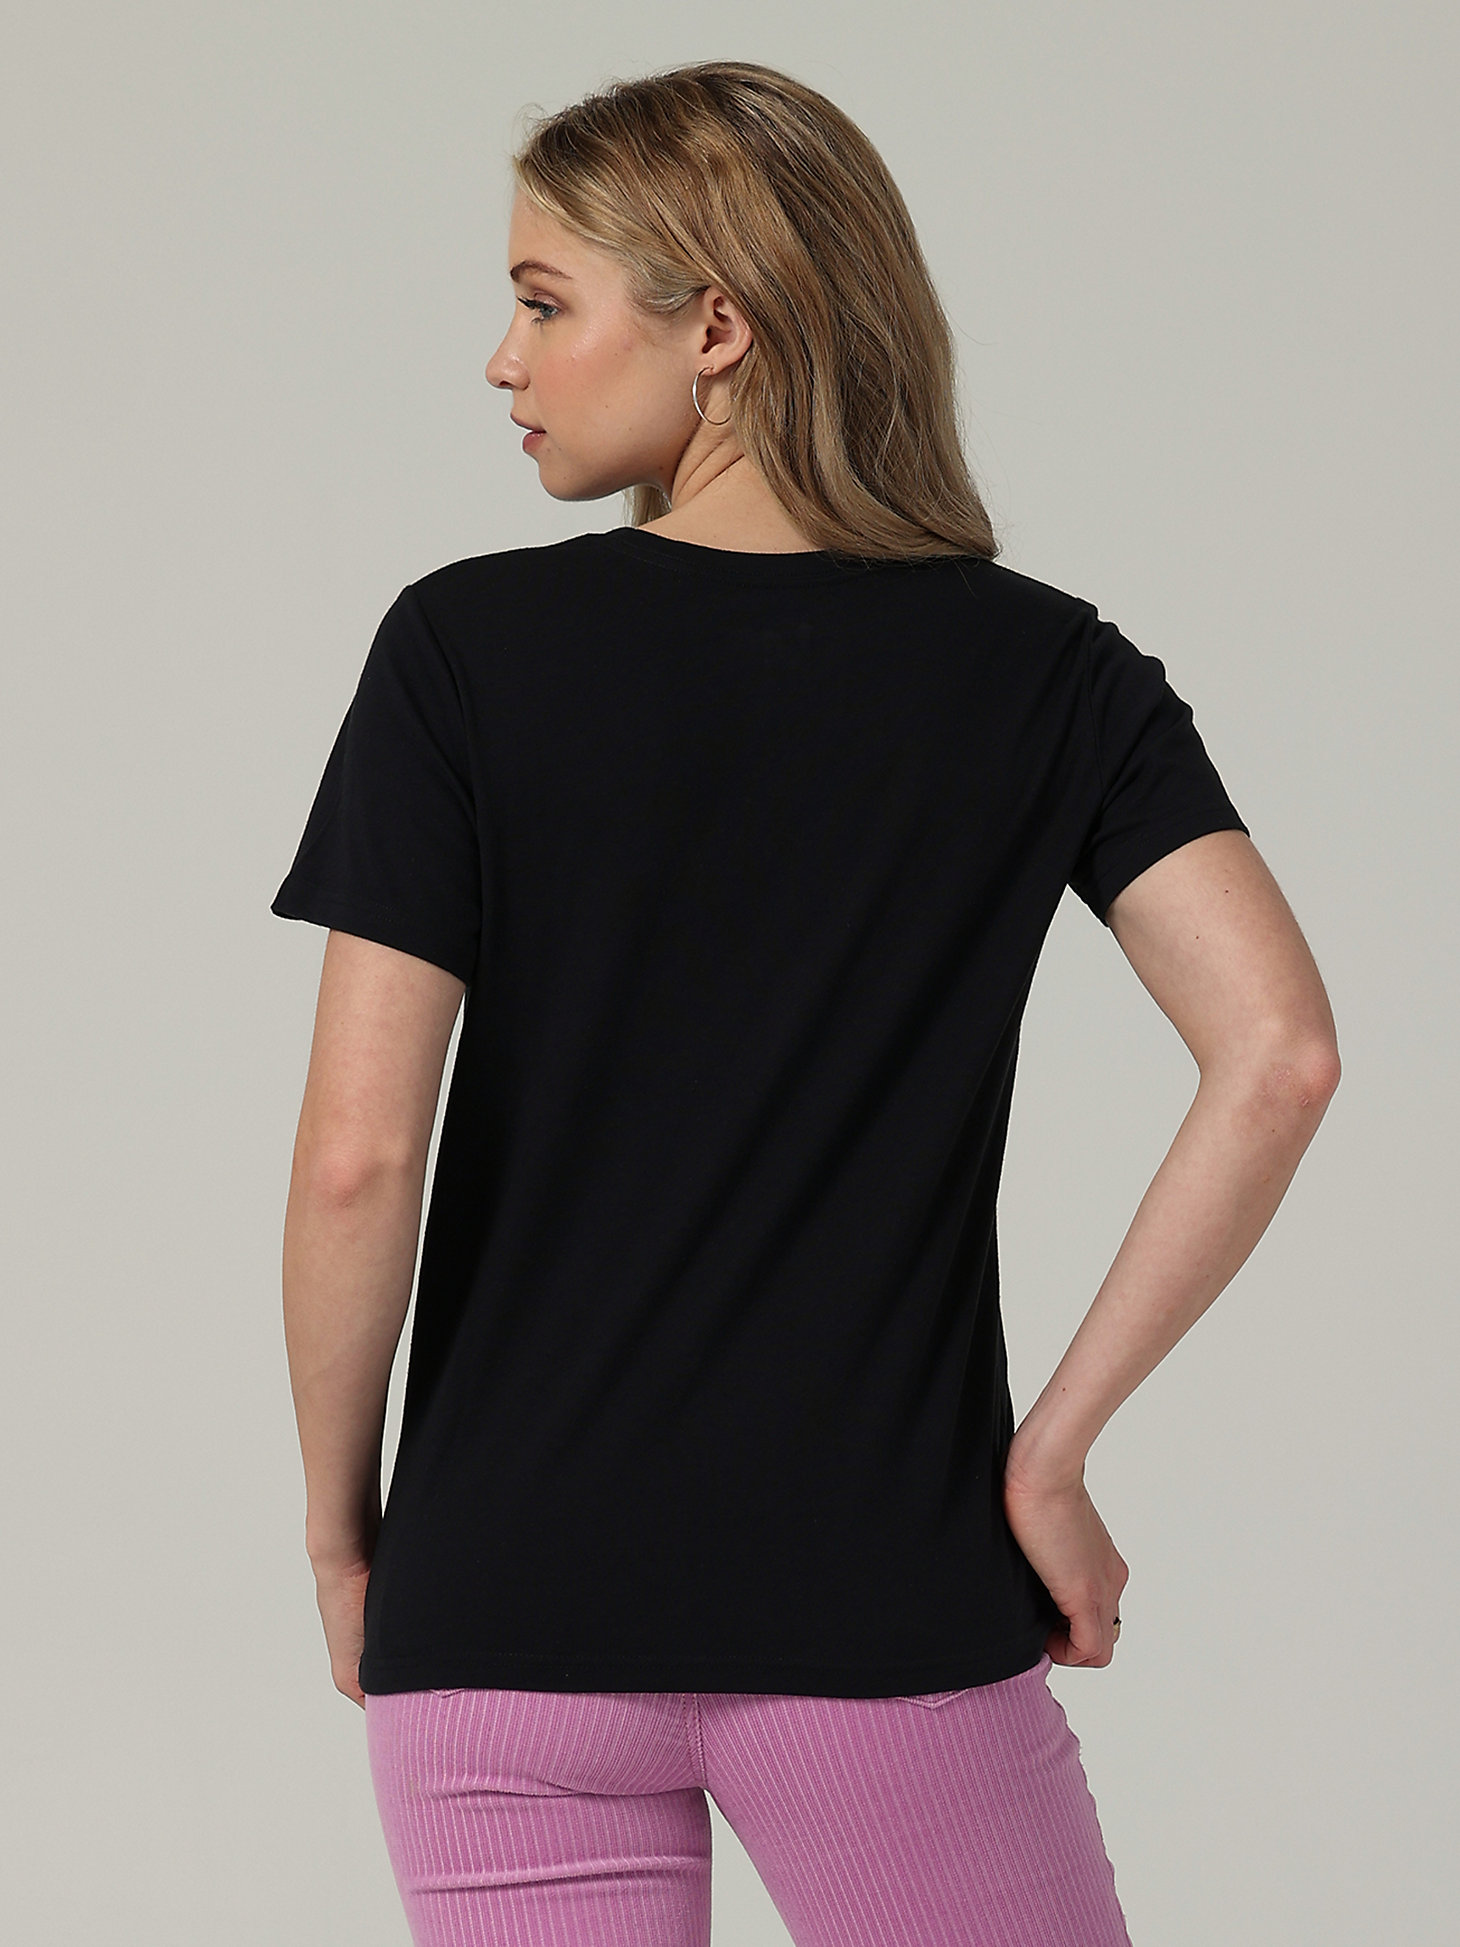 Women's Lee x Bonnaroo Festival Graphic Tee in Washed Black alternative view 2